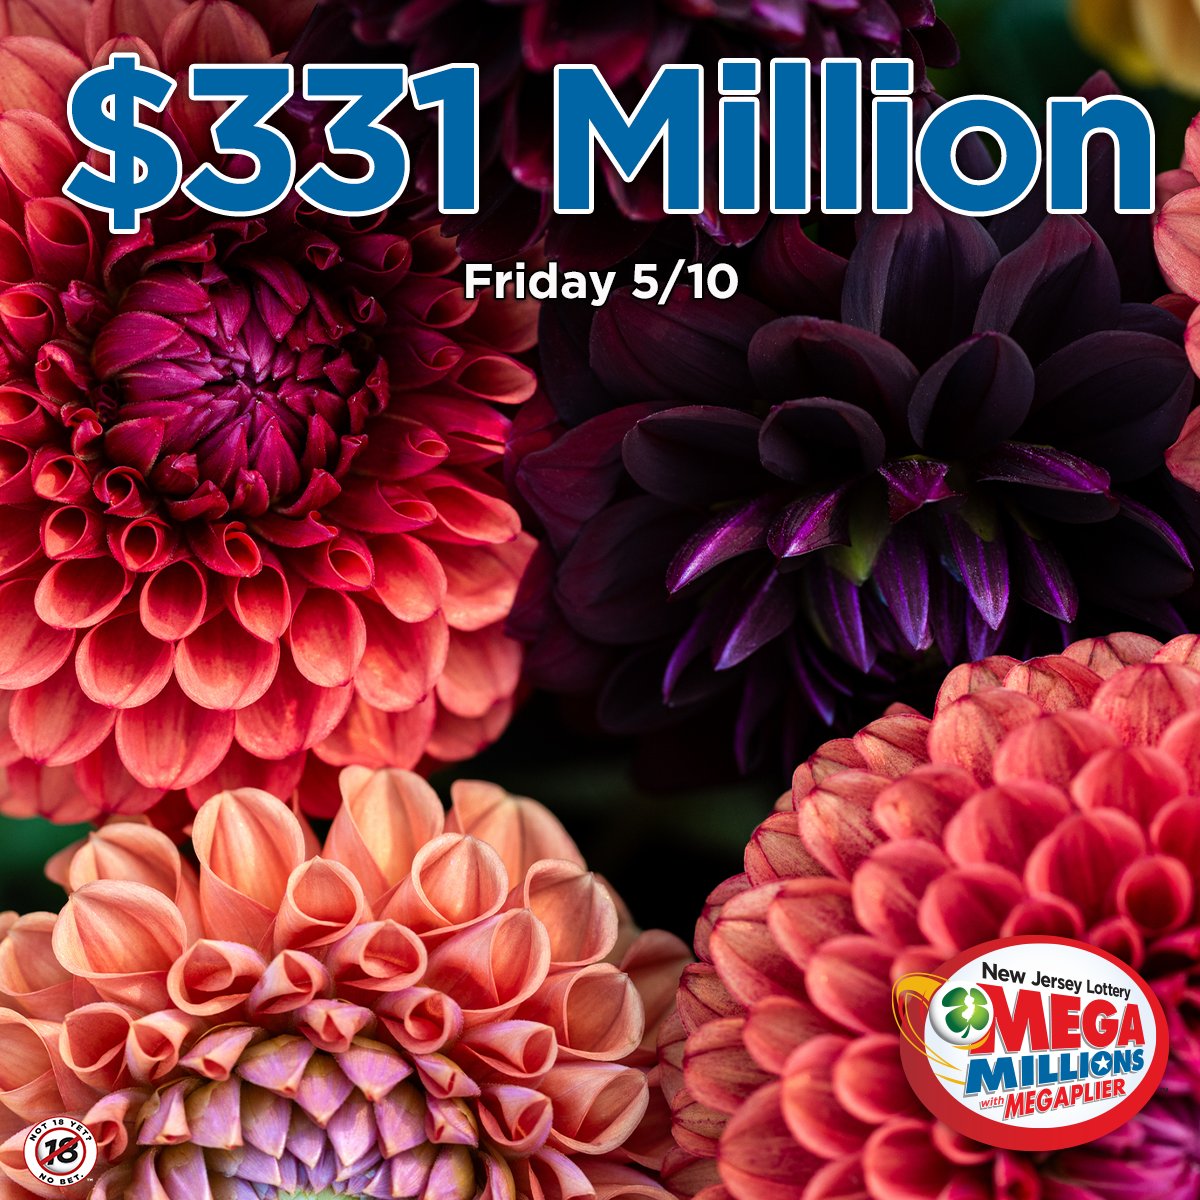 We’re dreaming of a #MegaMillions garden filled with flowers and fortune! 🌸🌺🌷Are you getting your ticket for Friday’s $331,000,000 jackpot?! Let us know! For Mega Millions game odds, visit NJLottery.com/MegaMillions. #AnythingCanHappenInJersey 🍀